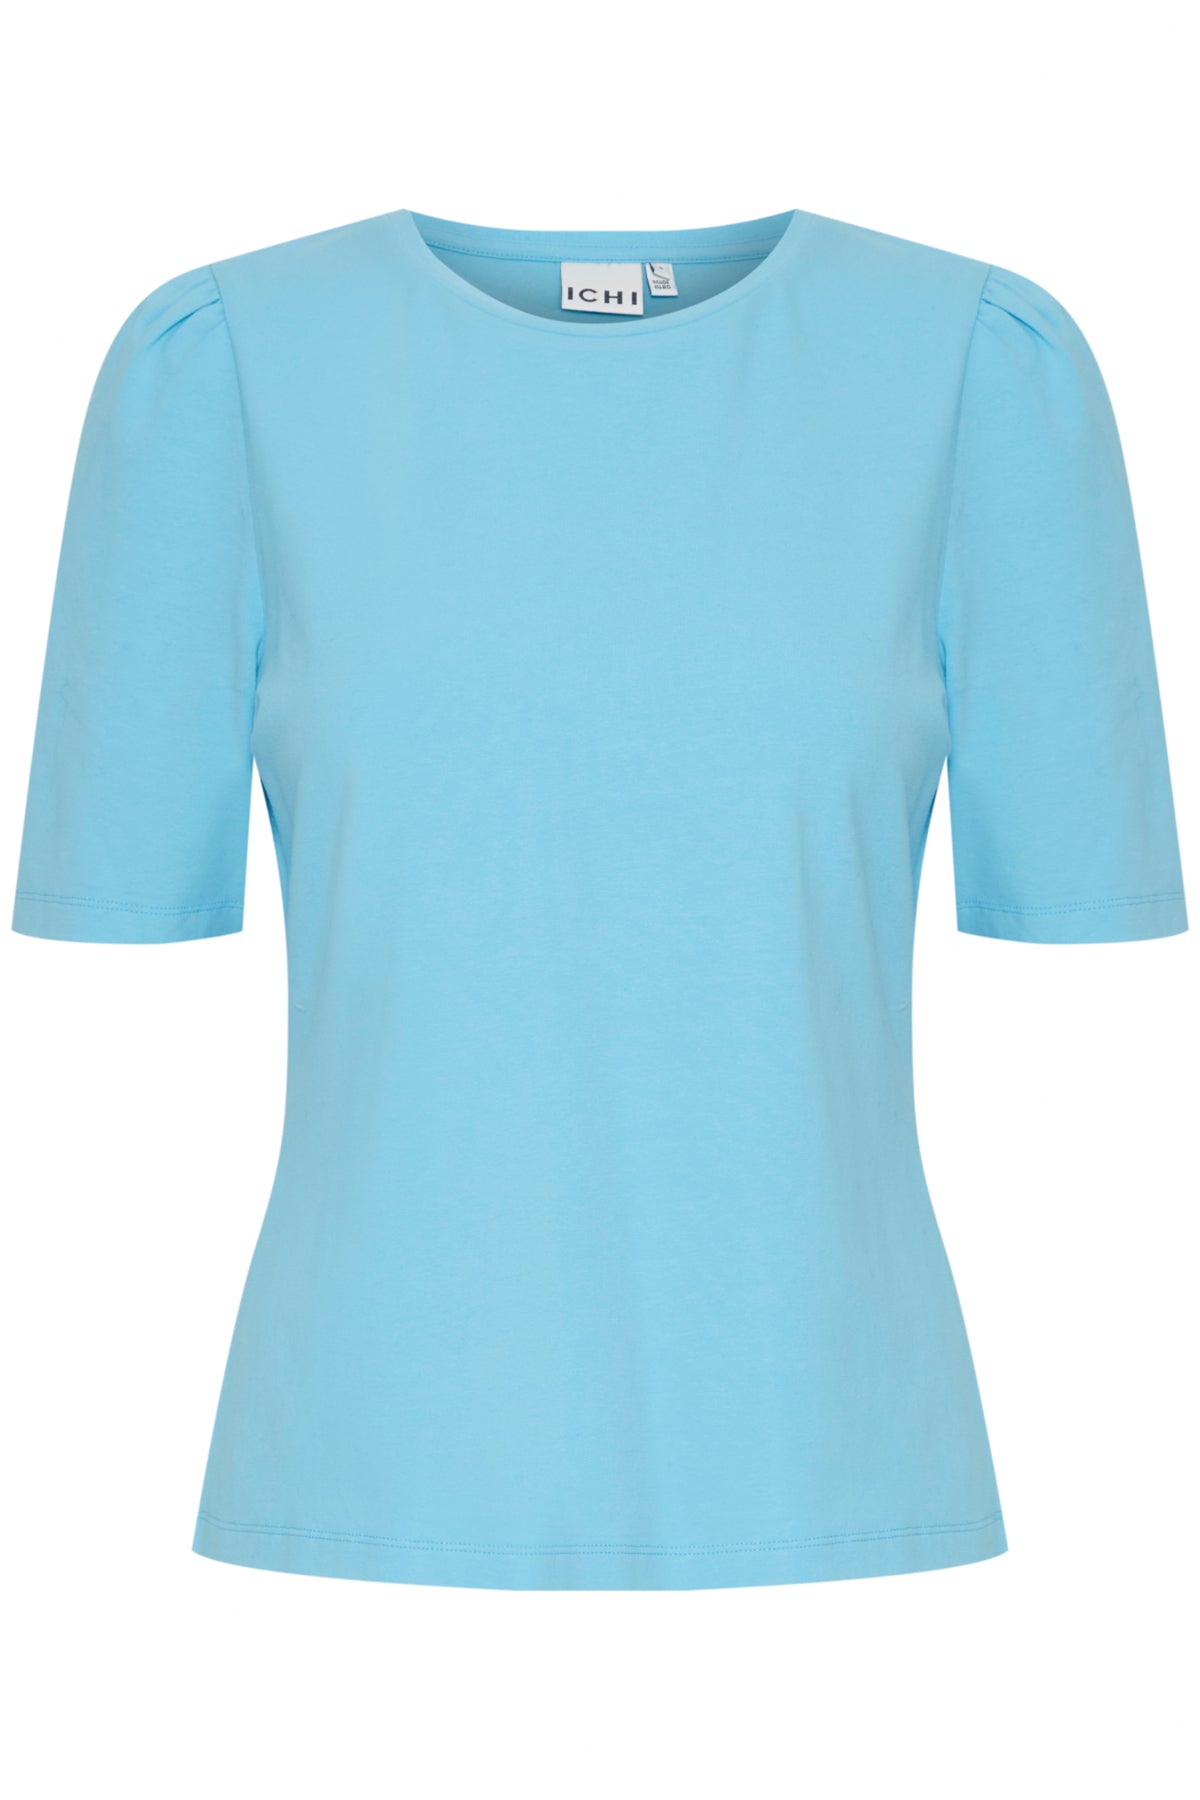 Lilvina Basic Tee in Blue Grotto